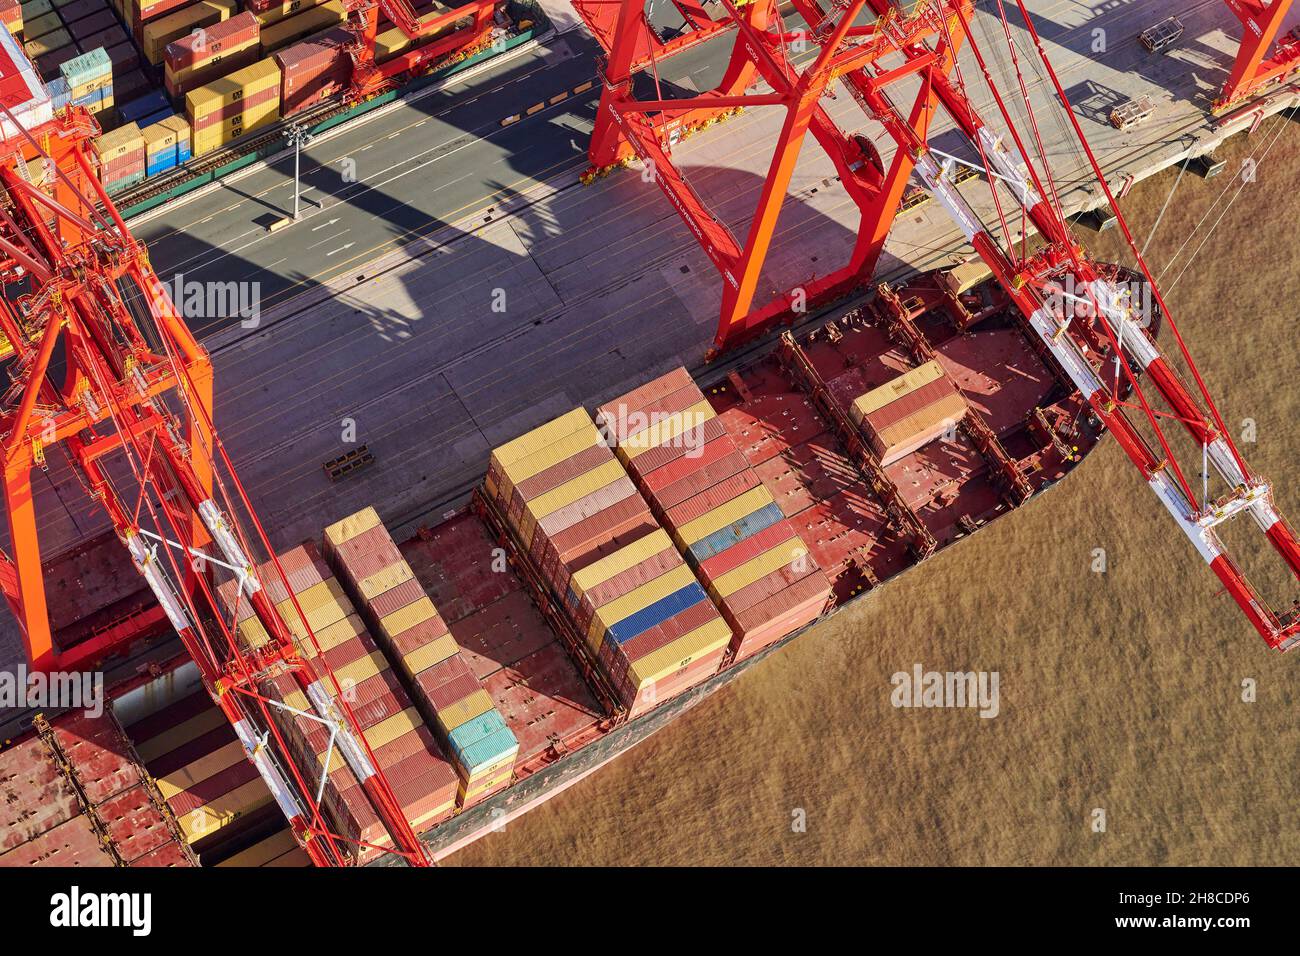 An overhead view of containers on shipping, River Mersey, Liverpool Docks, North West England, UK Stock Photo